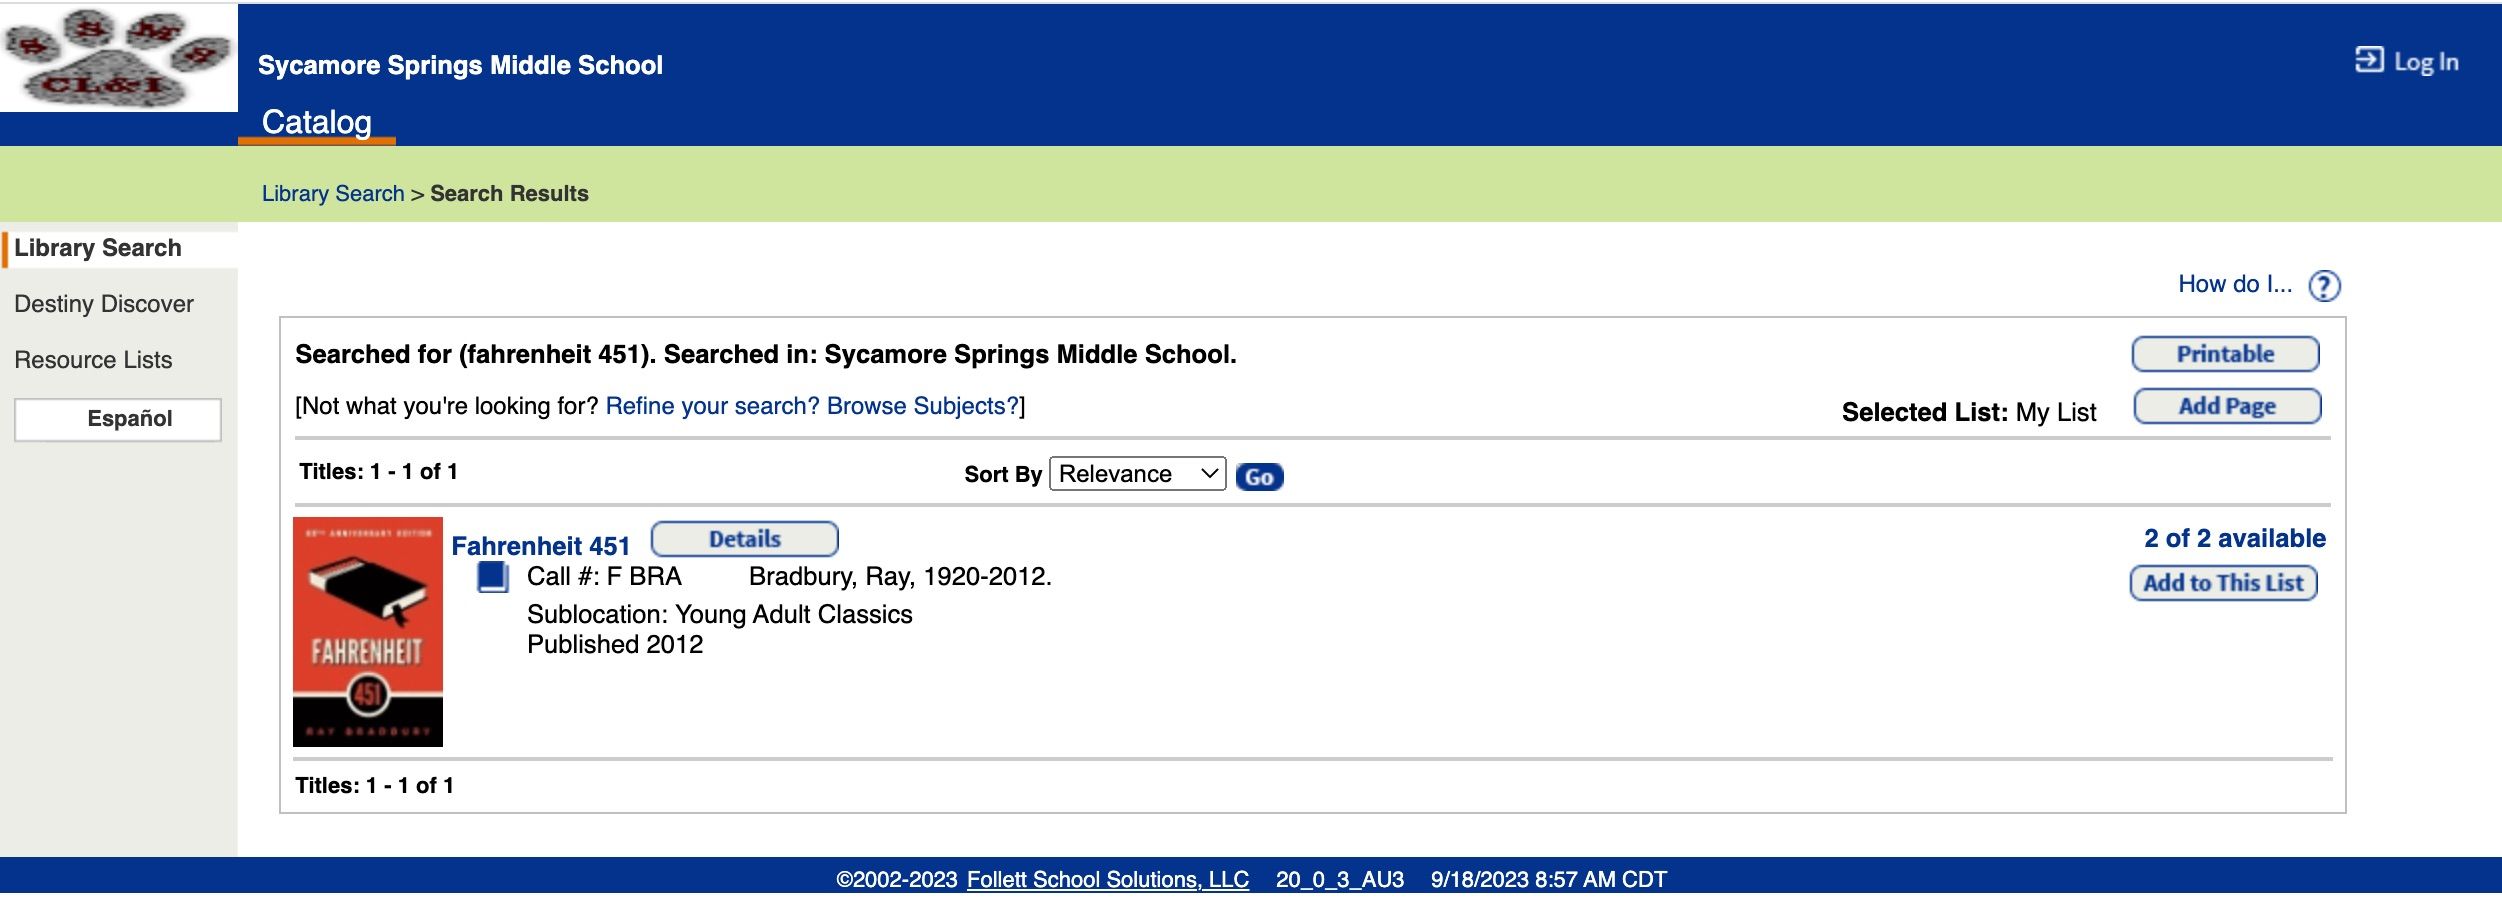 Image of the sycamore springs middle school catalog search for fahrenheit 451.